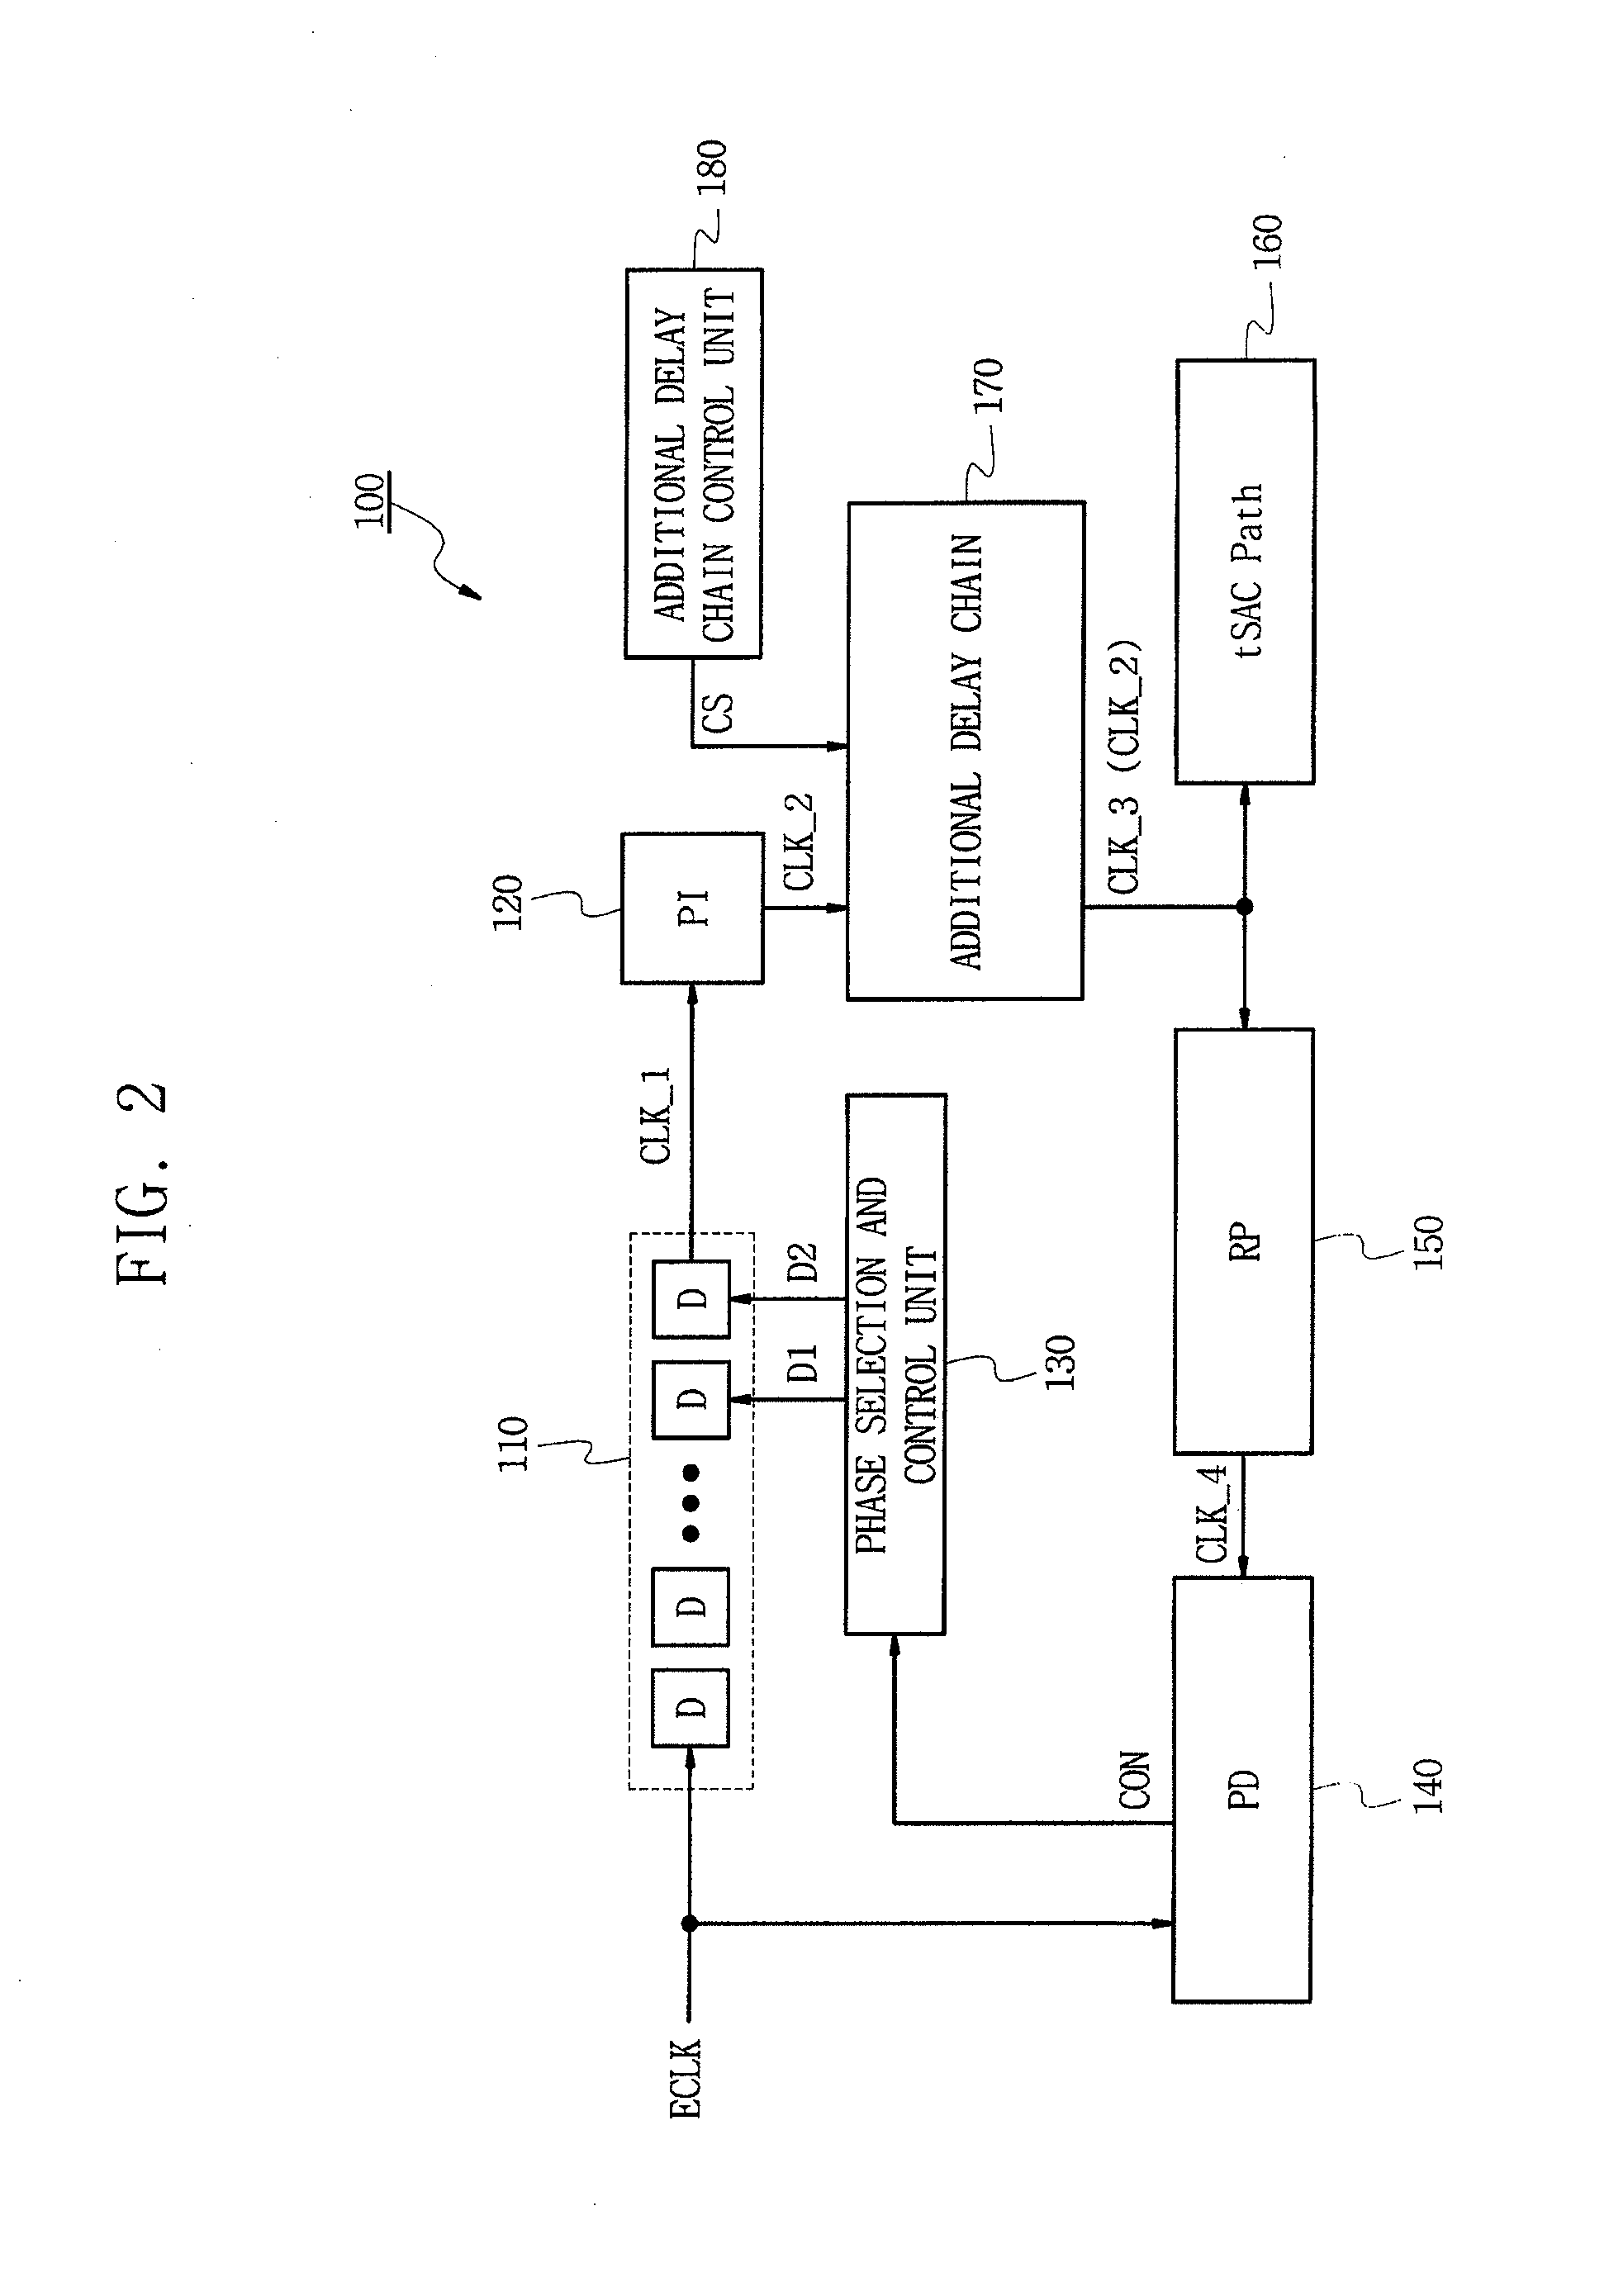 Delay locked loop circuits and method for controlling the same